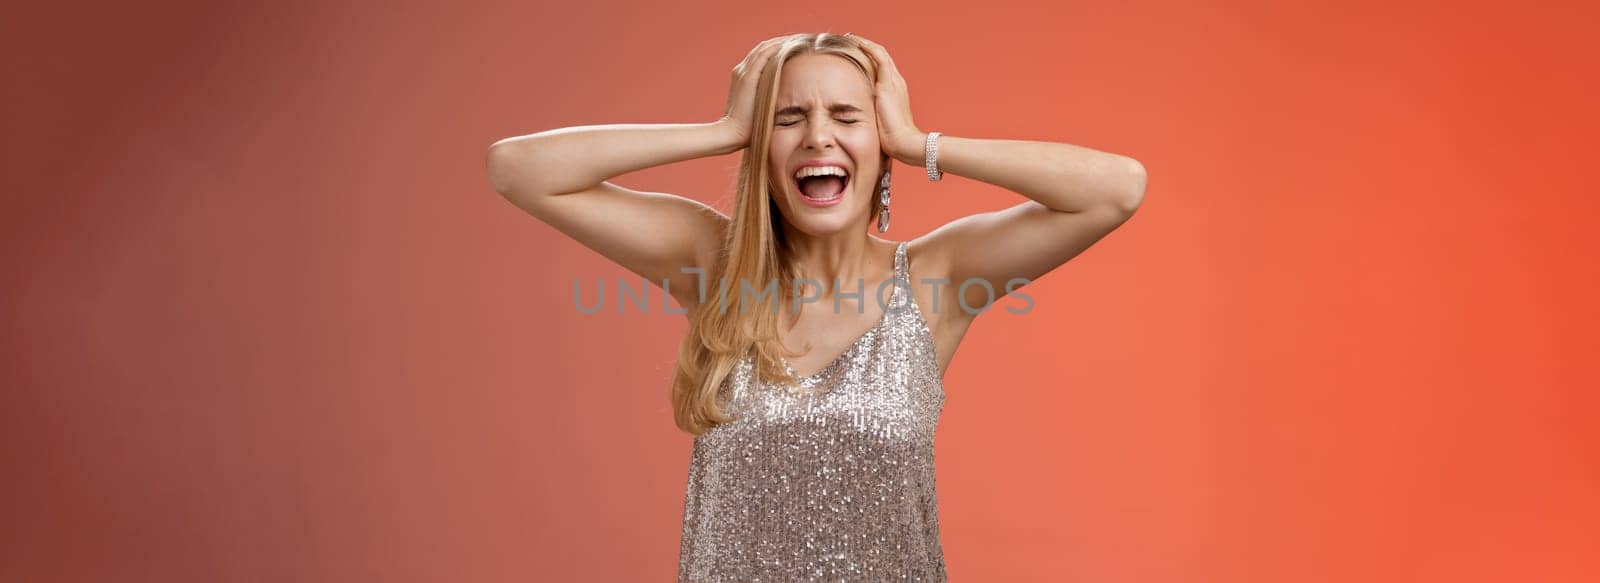 Lifestyle. Upset distressed pressured fed up panicking young blond woman in dress scream cry heart out being heartbroken close eyes hold hands head mentaly unstable standing sad depressed red background.